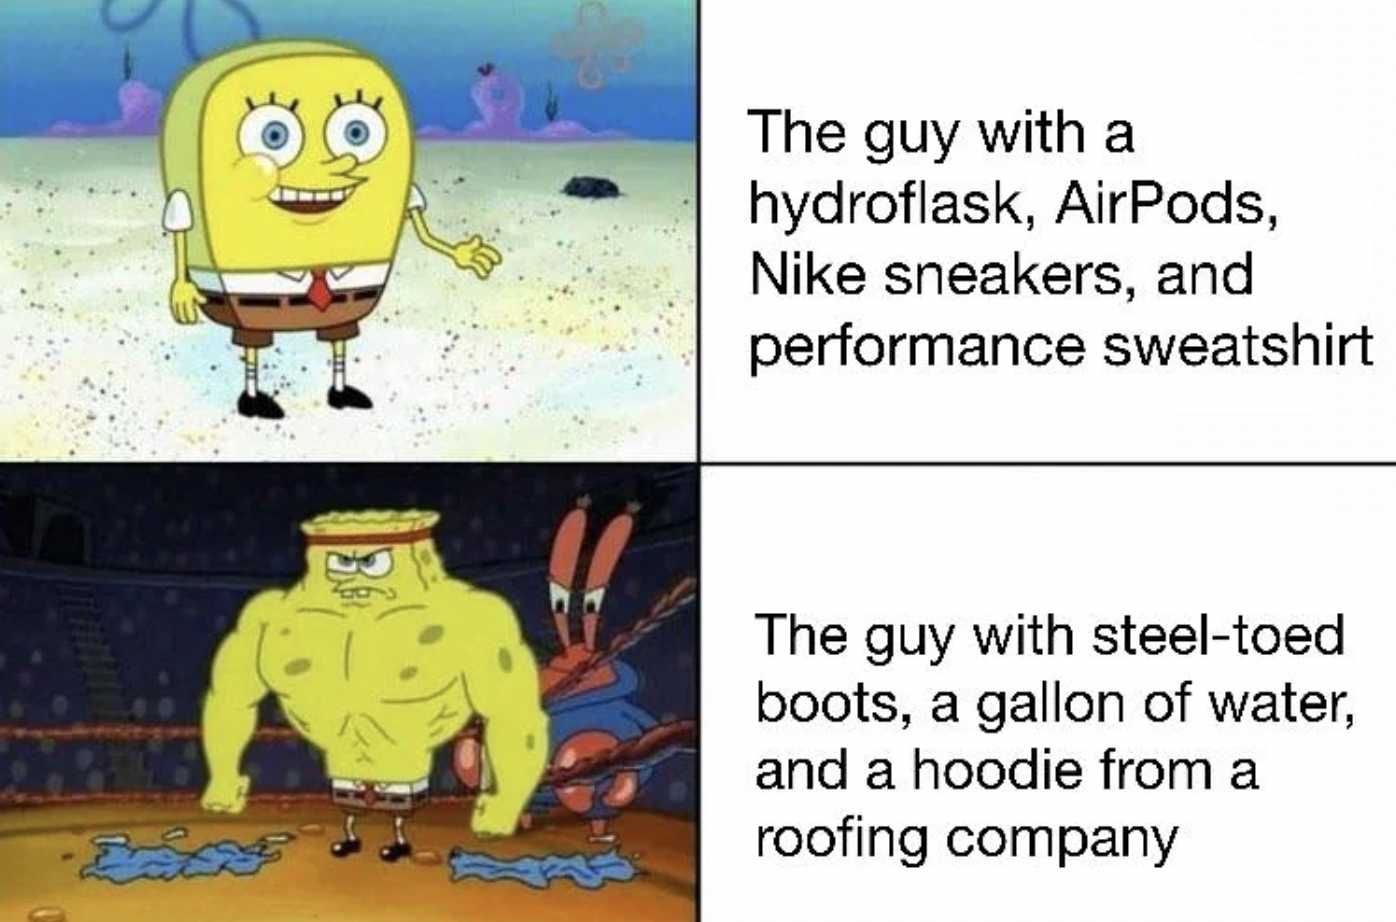 new google - The guy with a hydroflask, AirPods, Nike sneakers, and performance sweatshirt The guy with steeltoed boots, a gallon of water, and a hoodie from a roofing company